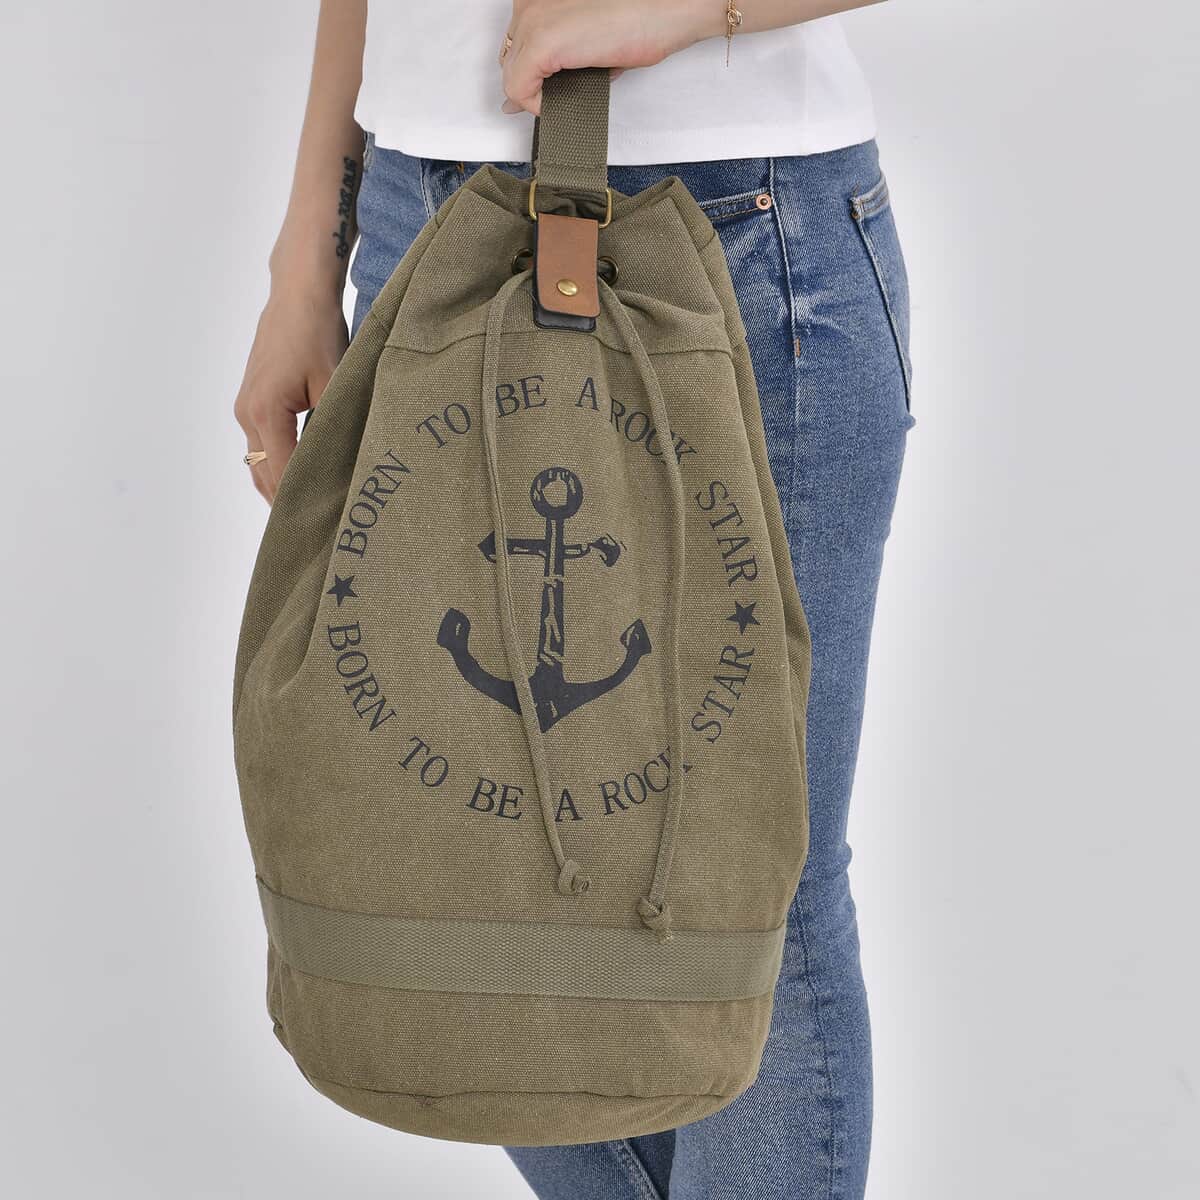 Navy Collection Army Green Color Anchor Pattern Backpack Bag (18.9"x10.6"x15.7") with Adjustable Double Shoulder Straps image number 2